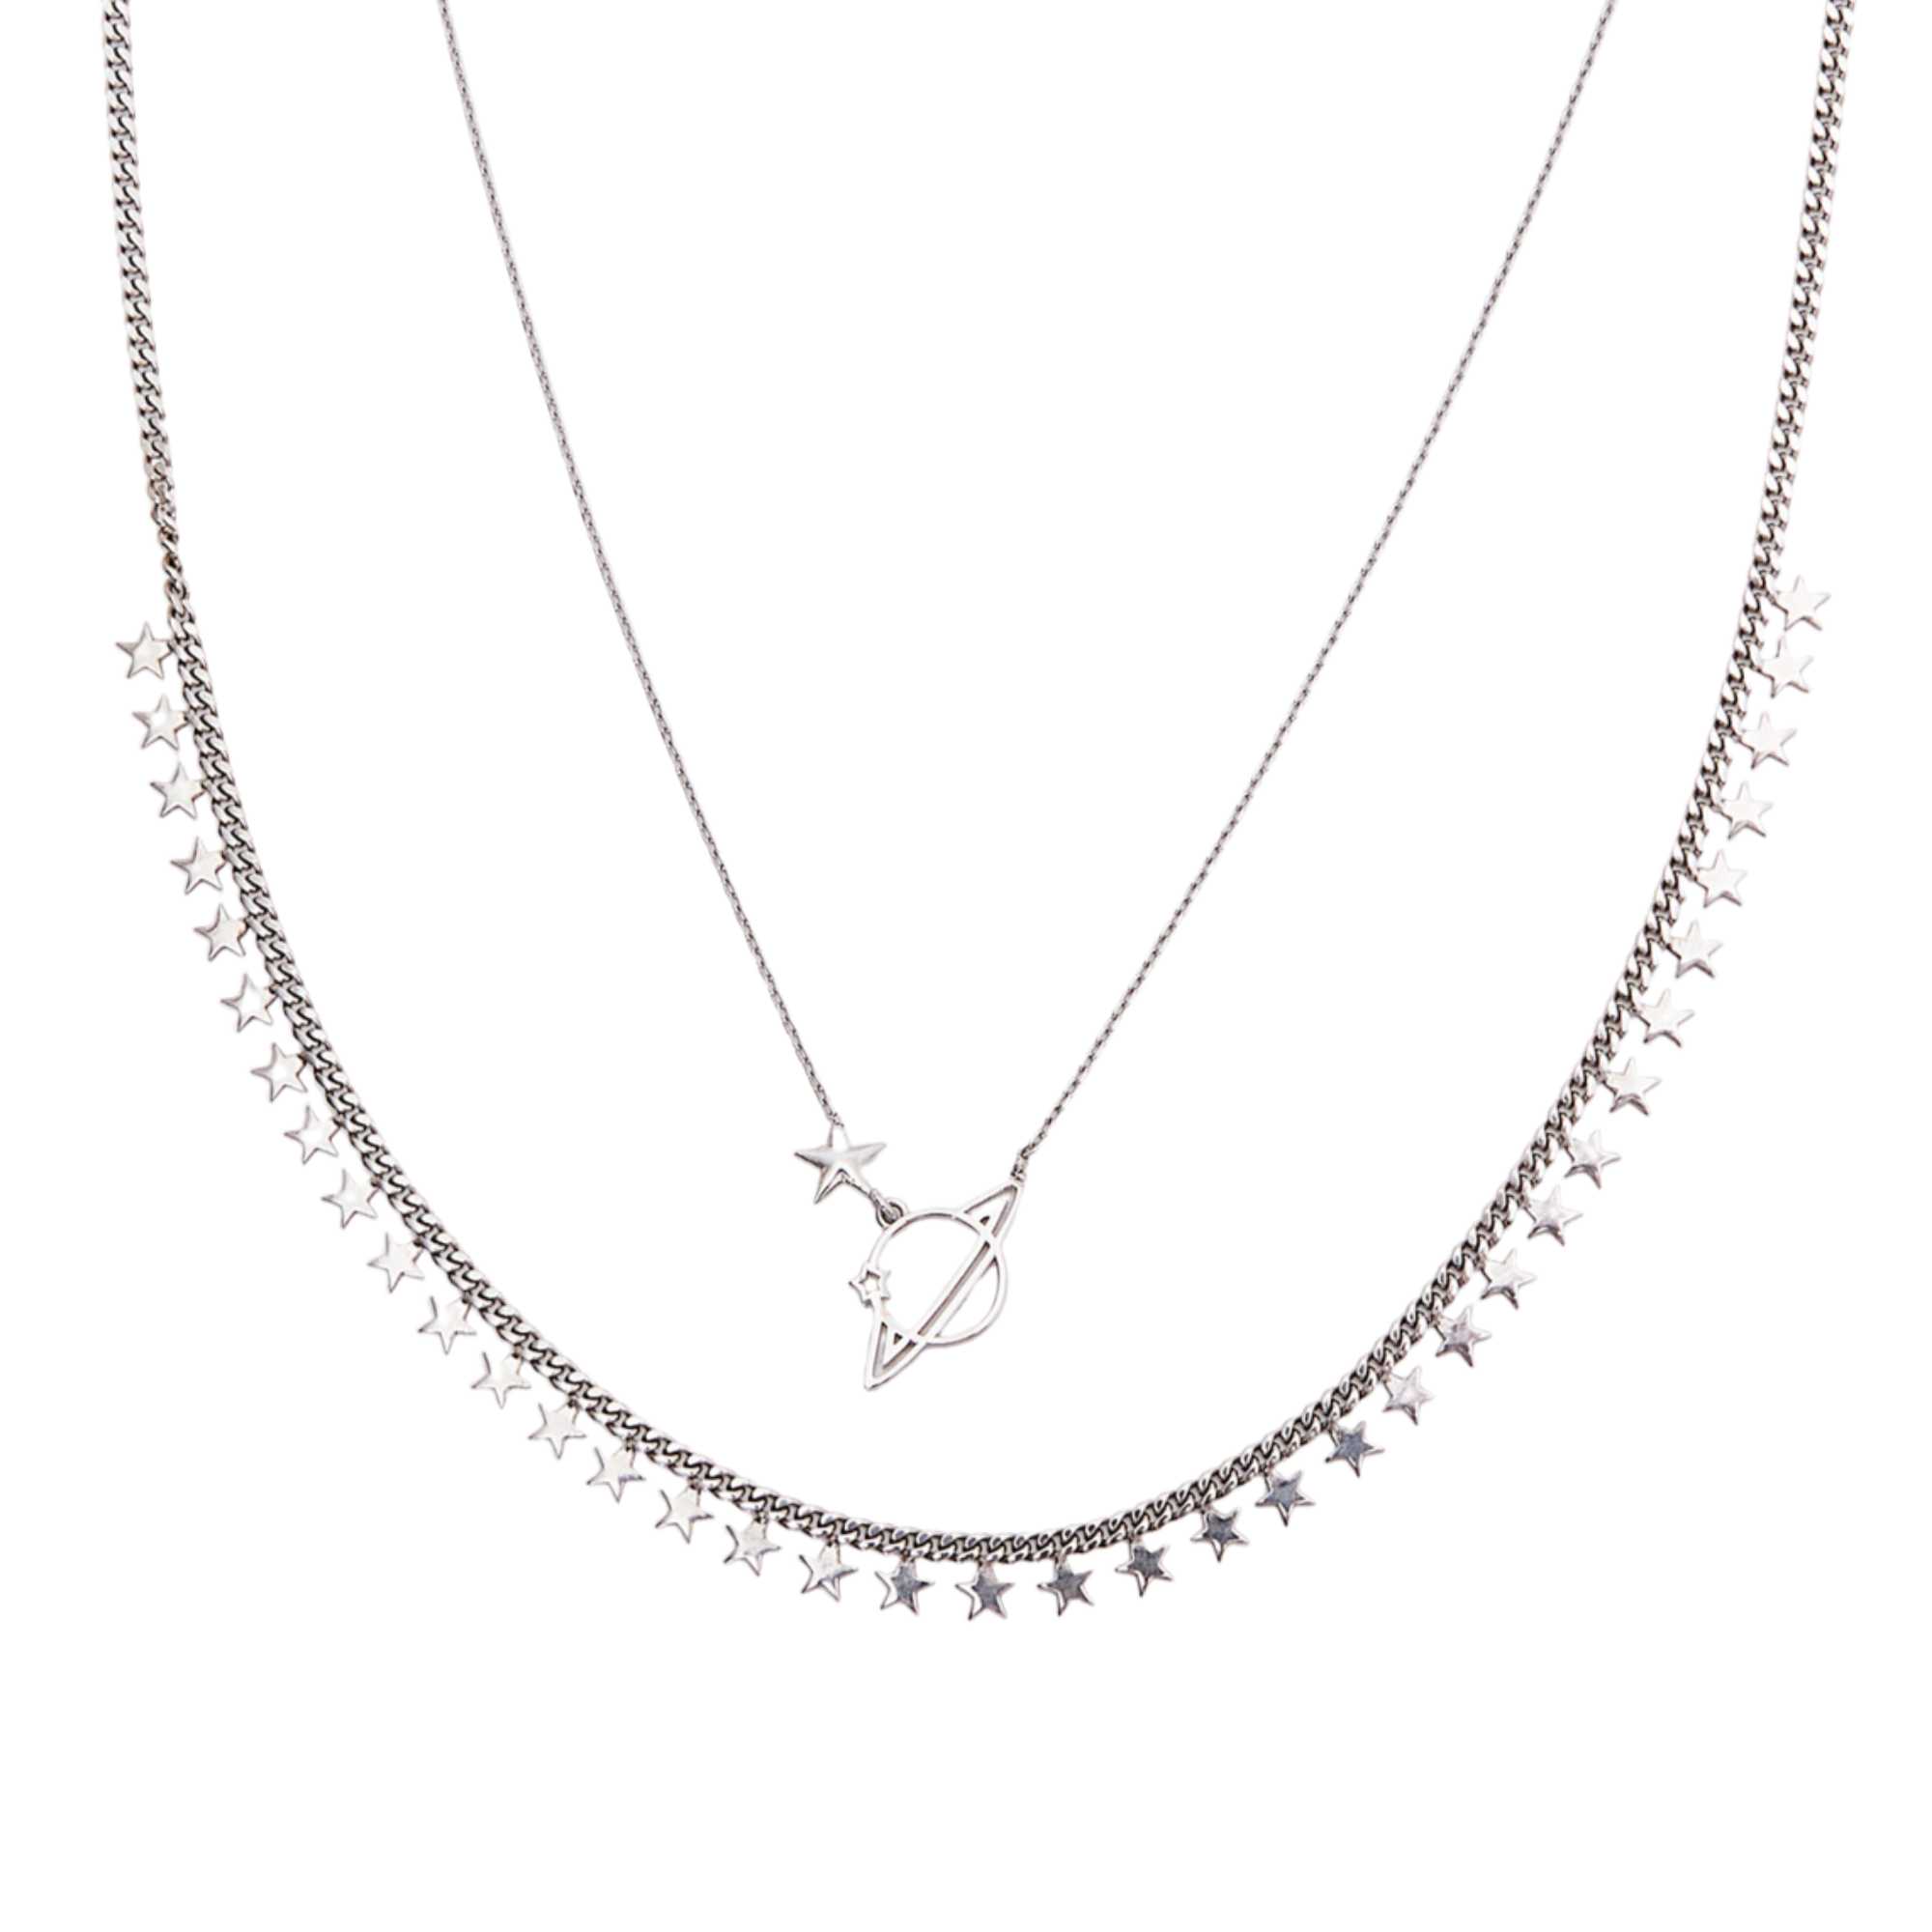 Multiple Star Sterling Silver Station and Saturn Necklace Set